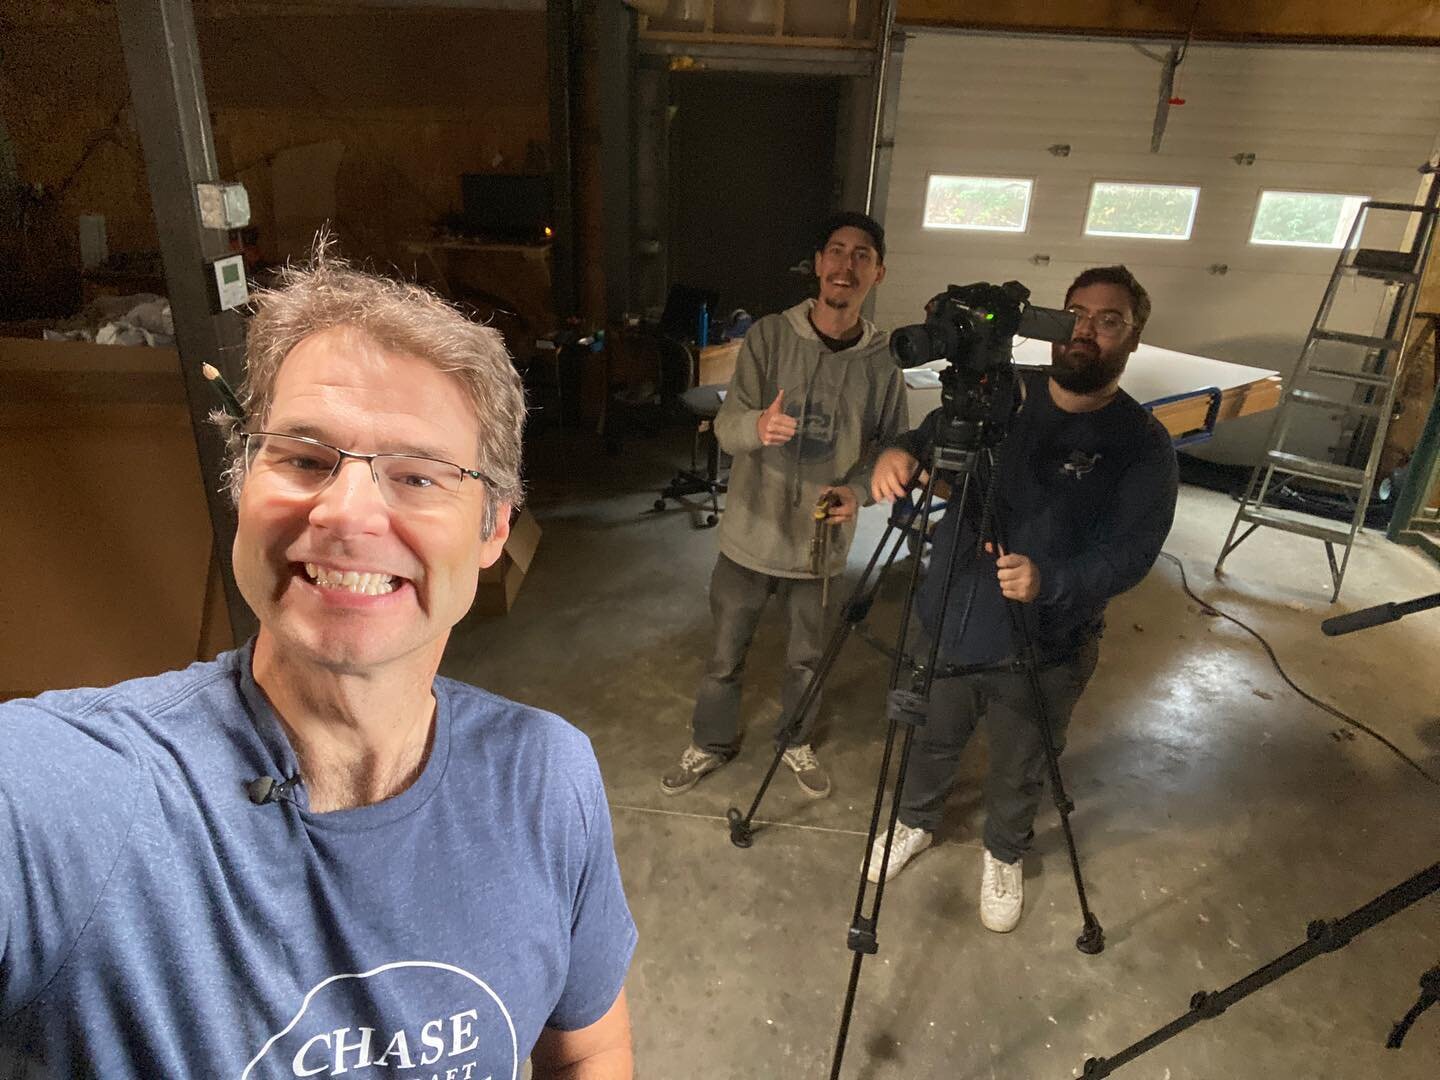 @osmediaus was in the house today to shoot some footage for some promotional videos that will be forthcoming! Great guys, great company to work with. Thanks, Eric and Truman for a good day 3/3.